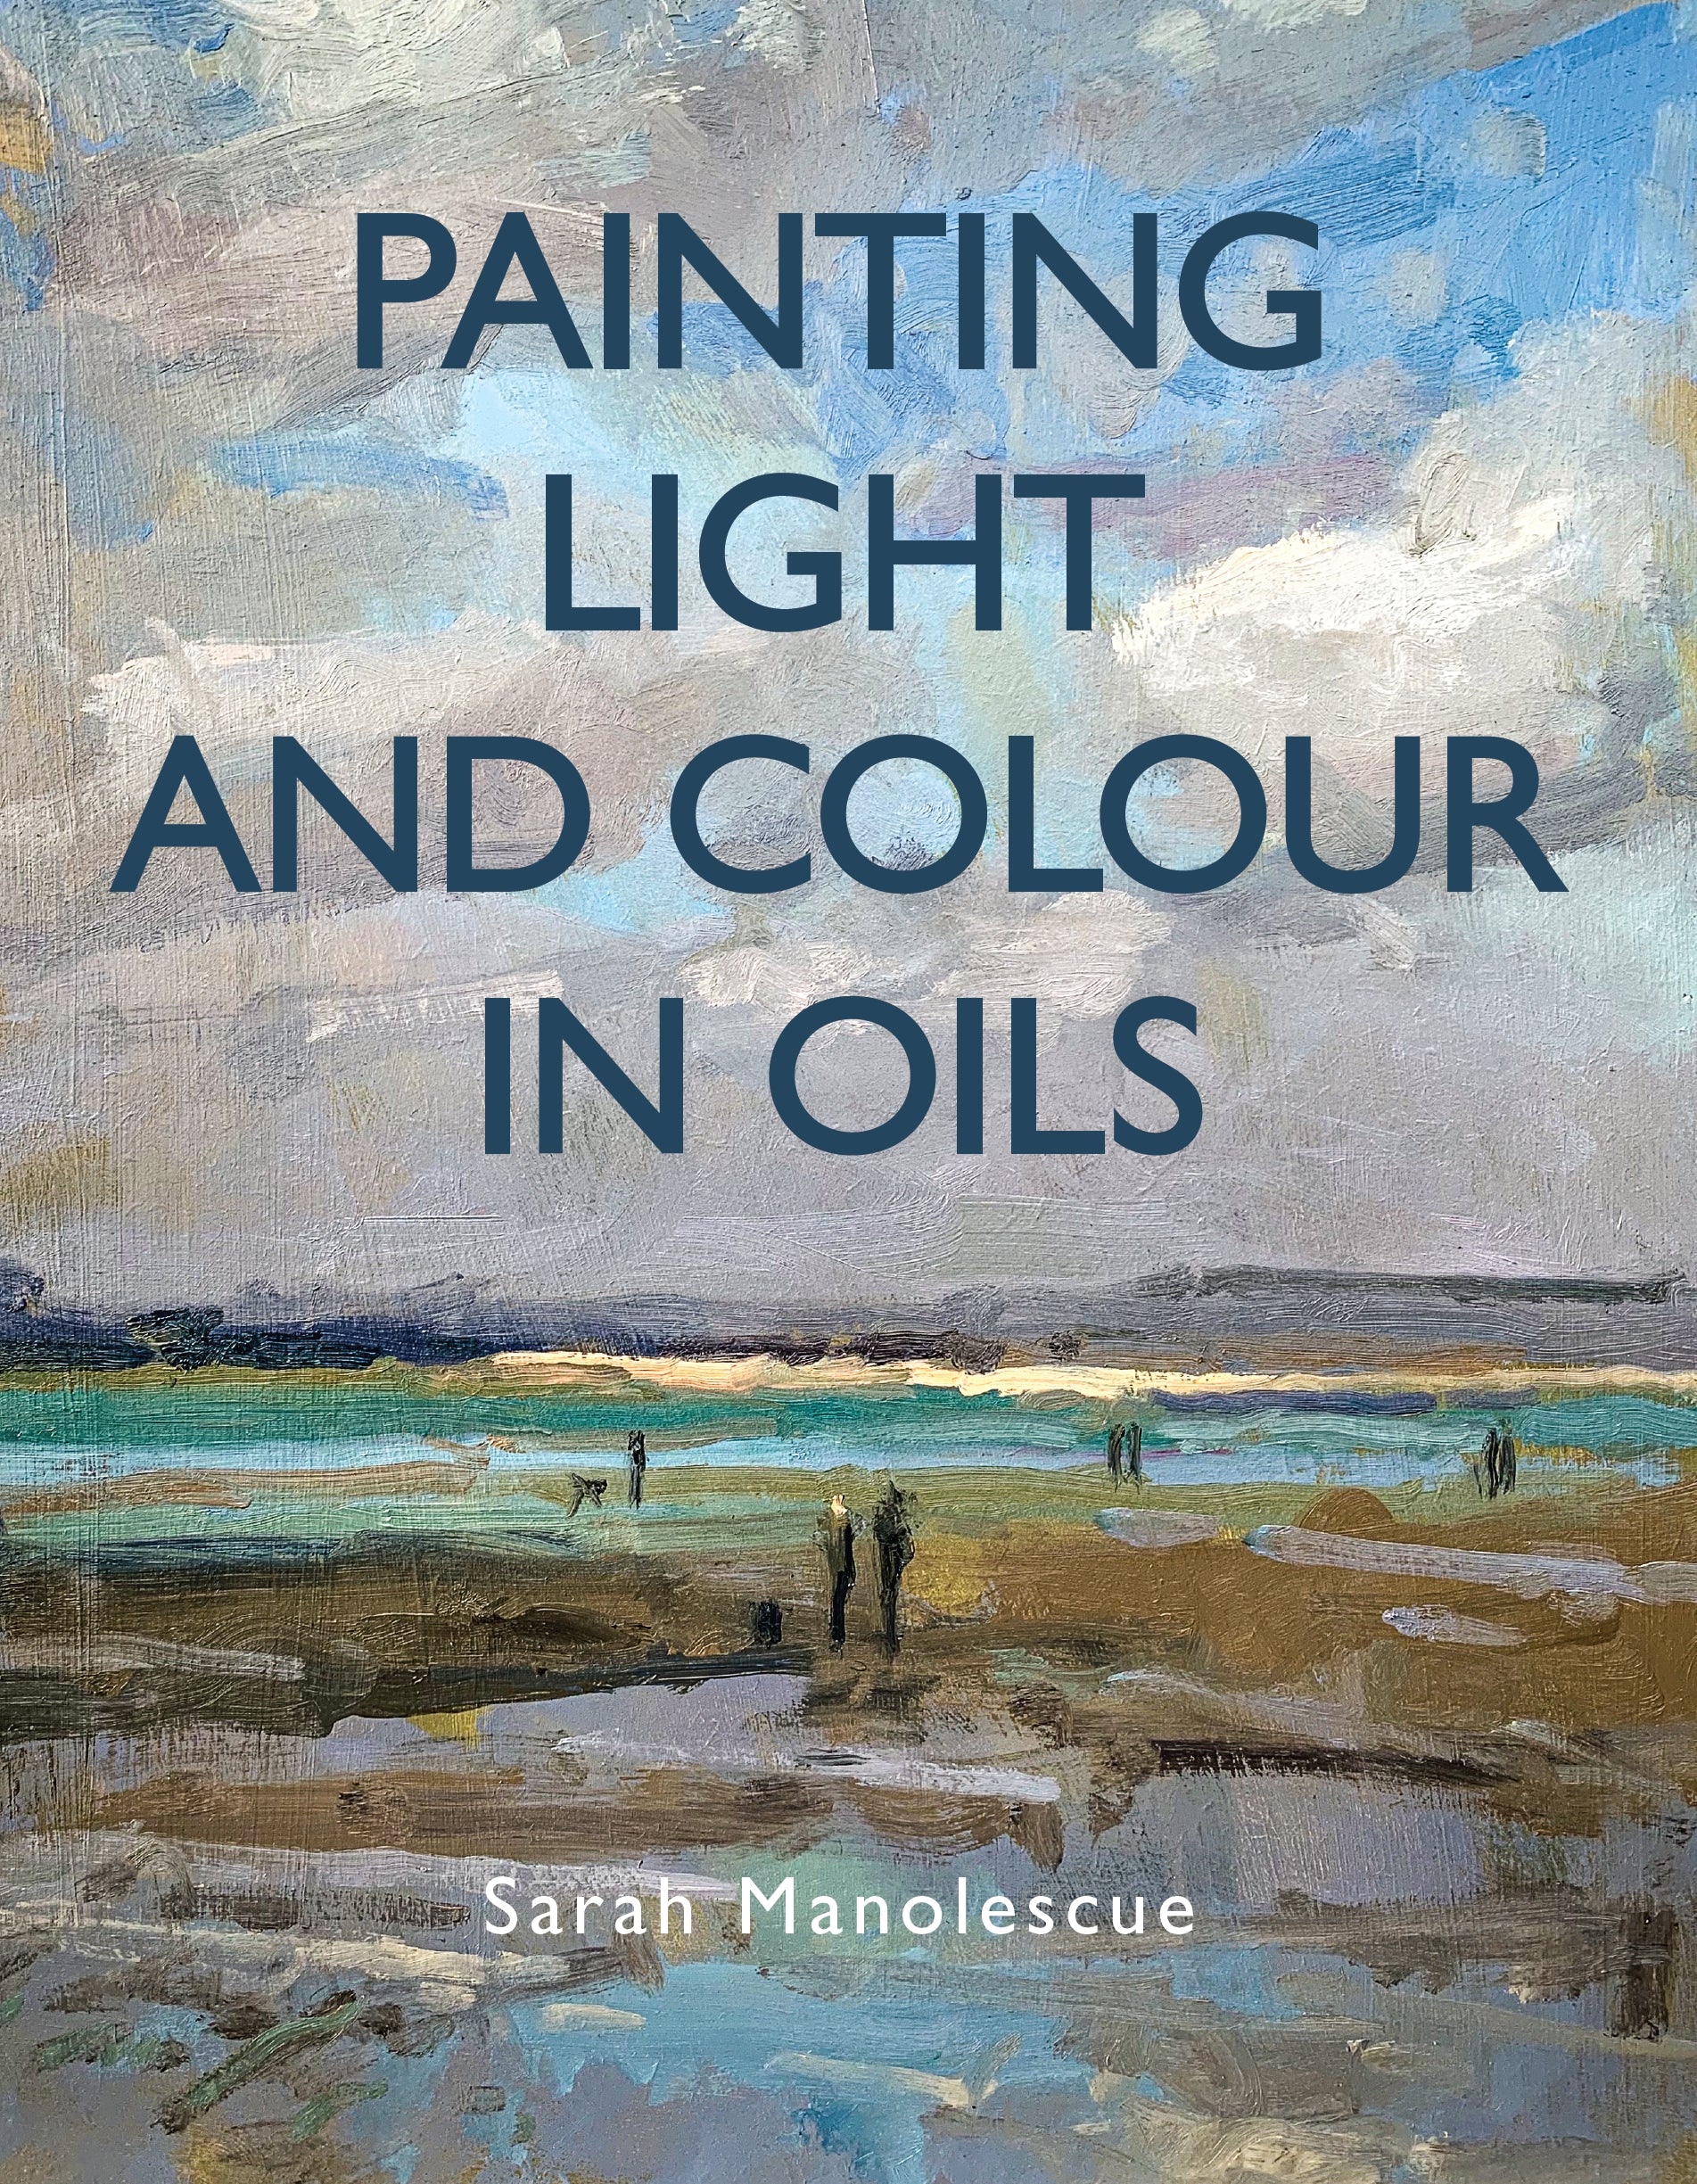 Painting Light and Colour in Oils